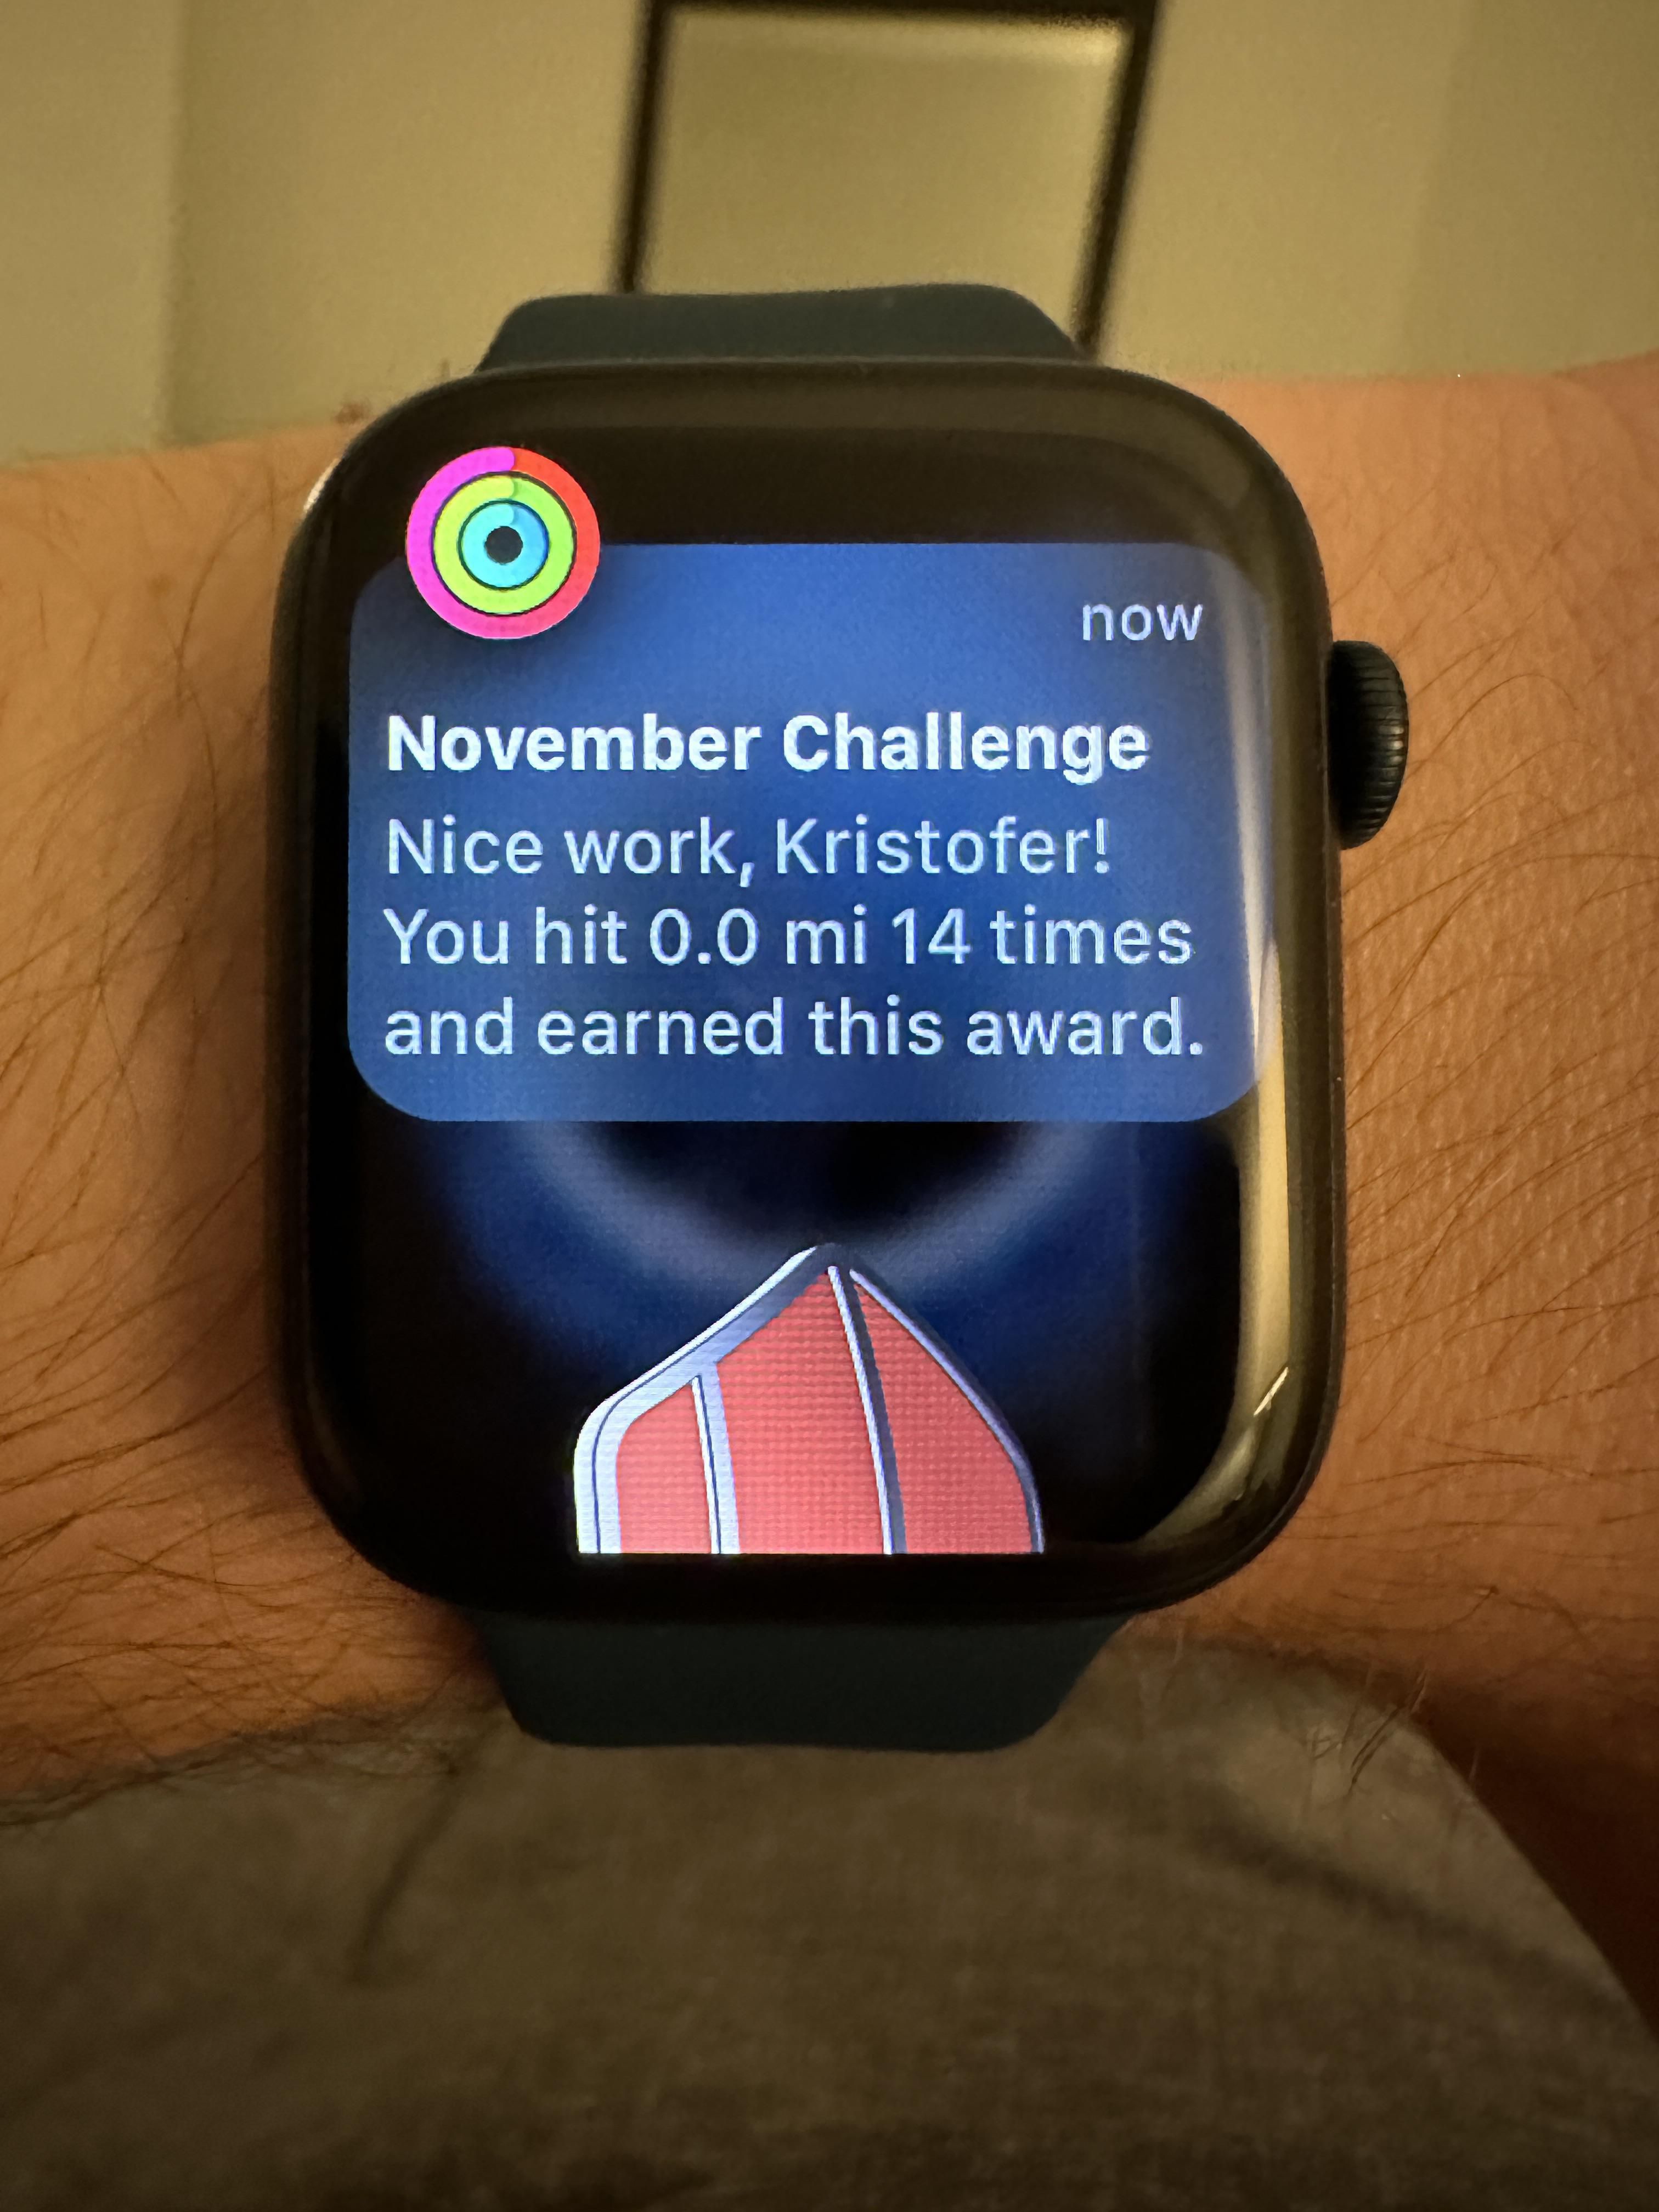 I’m still scratching my head over why my watch felt the need to give me this award.